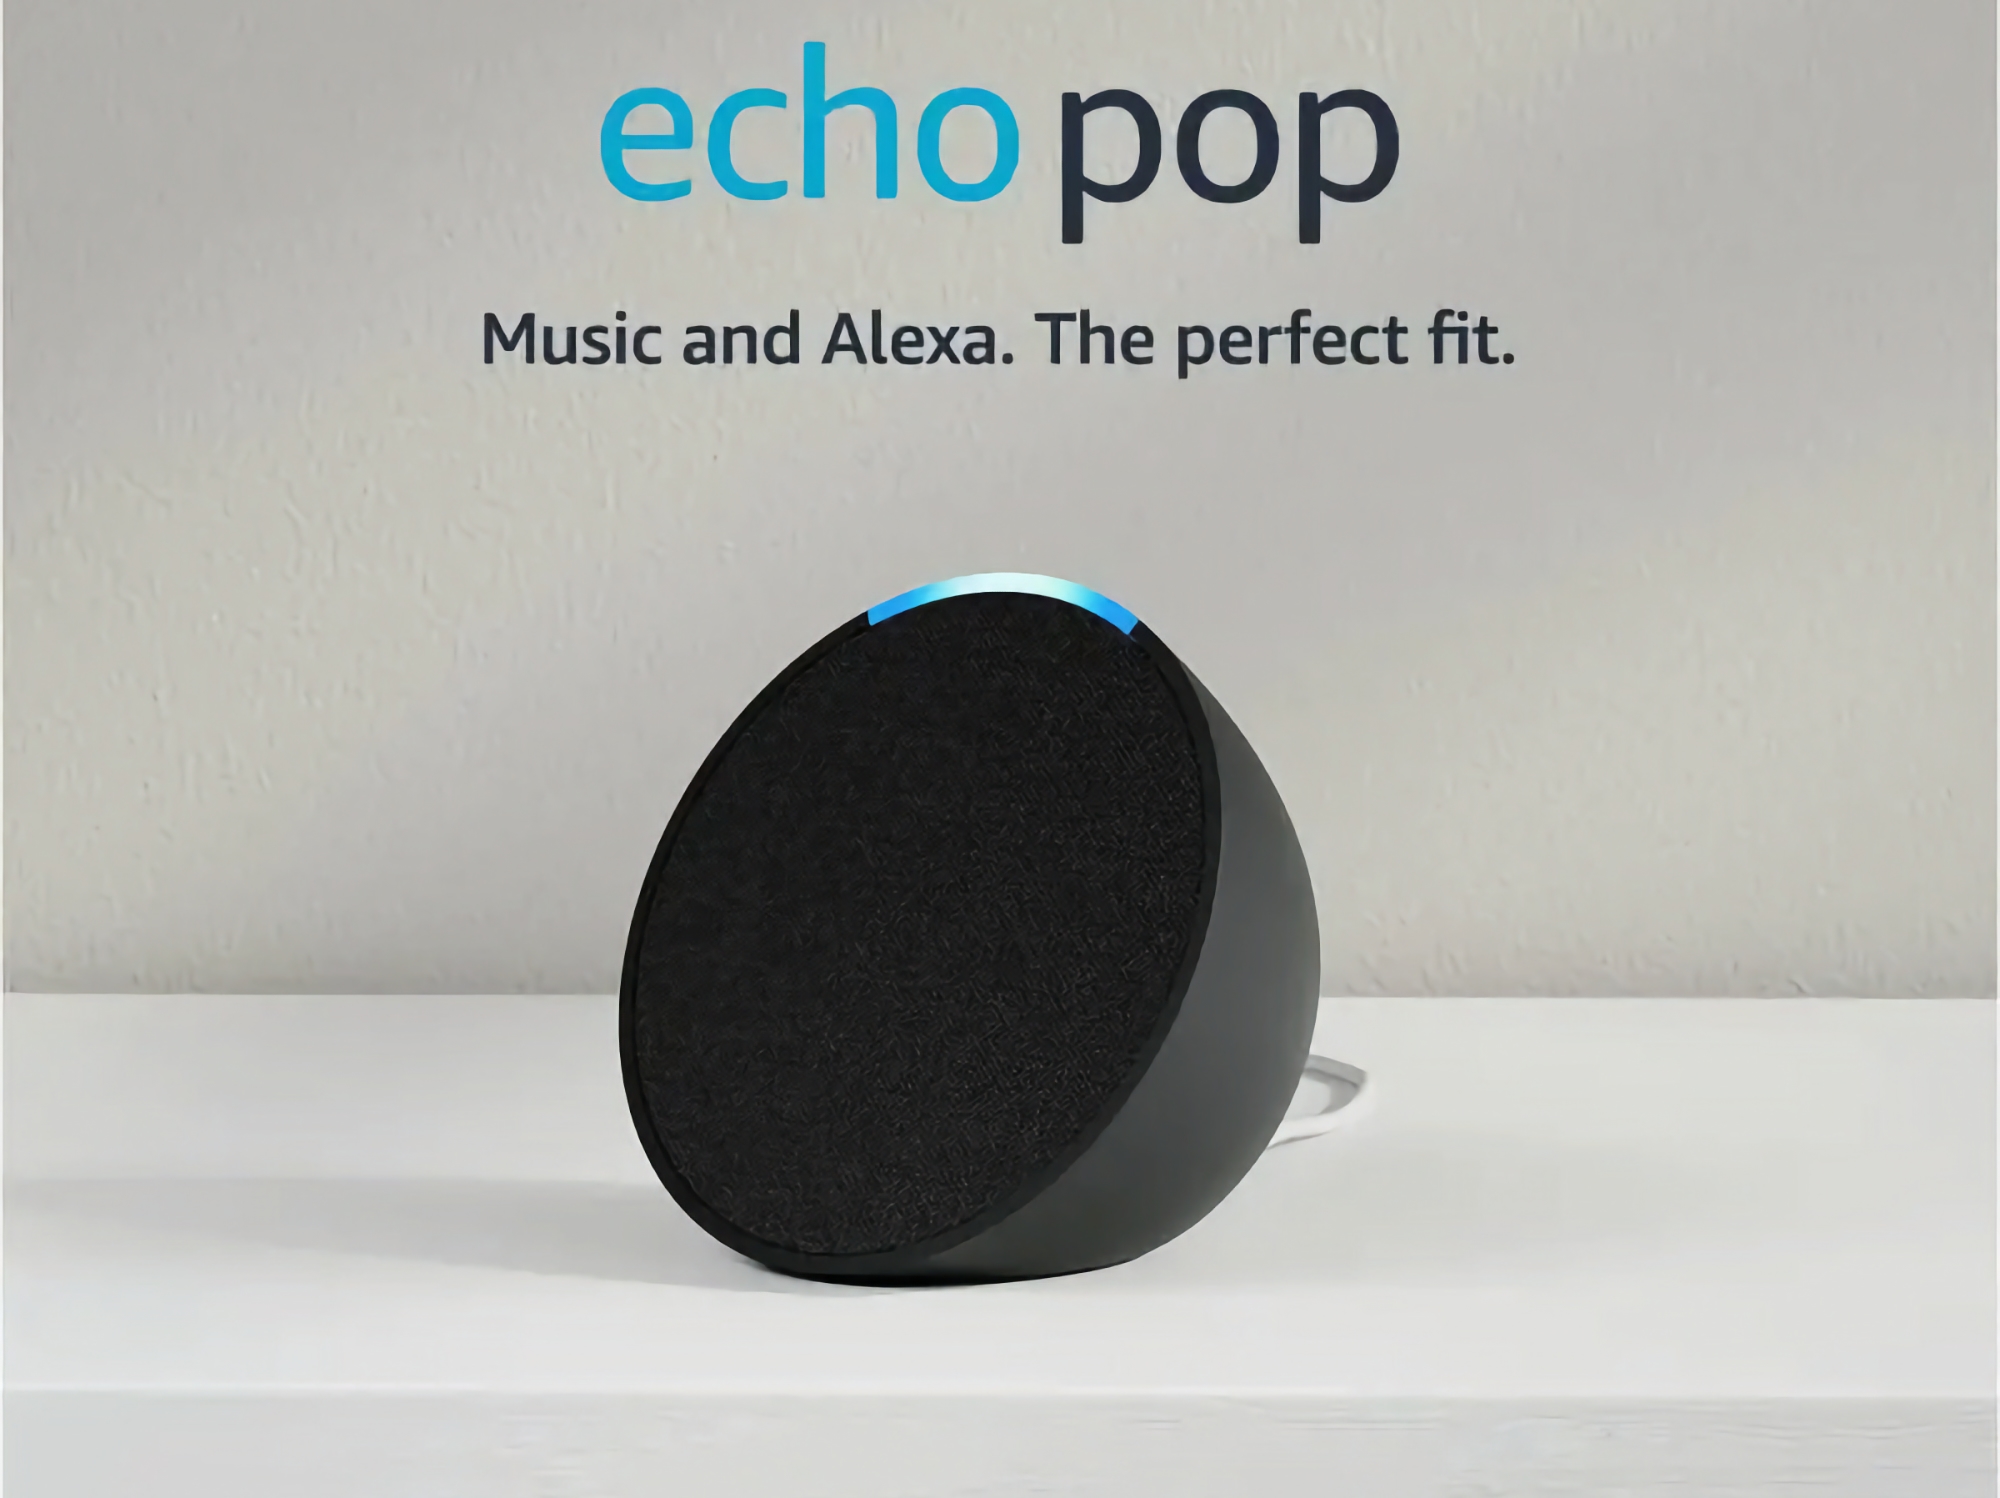 43% off: Amazon is selling the Echo Pop smart speaker at a promotional price